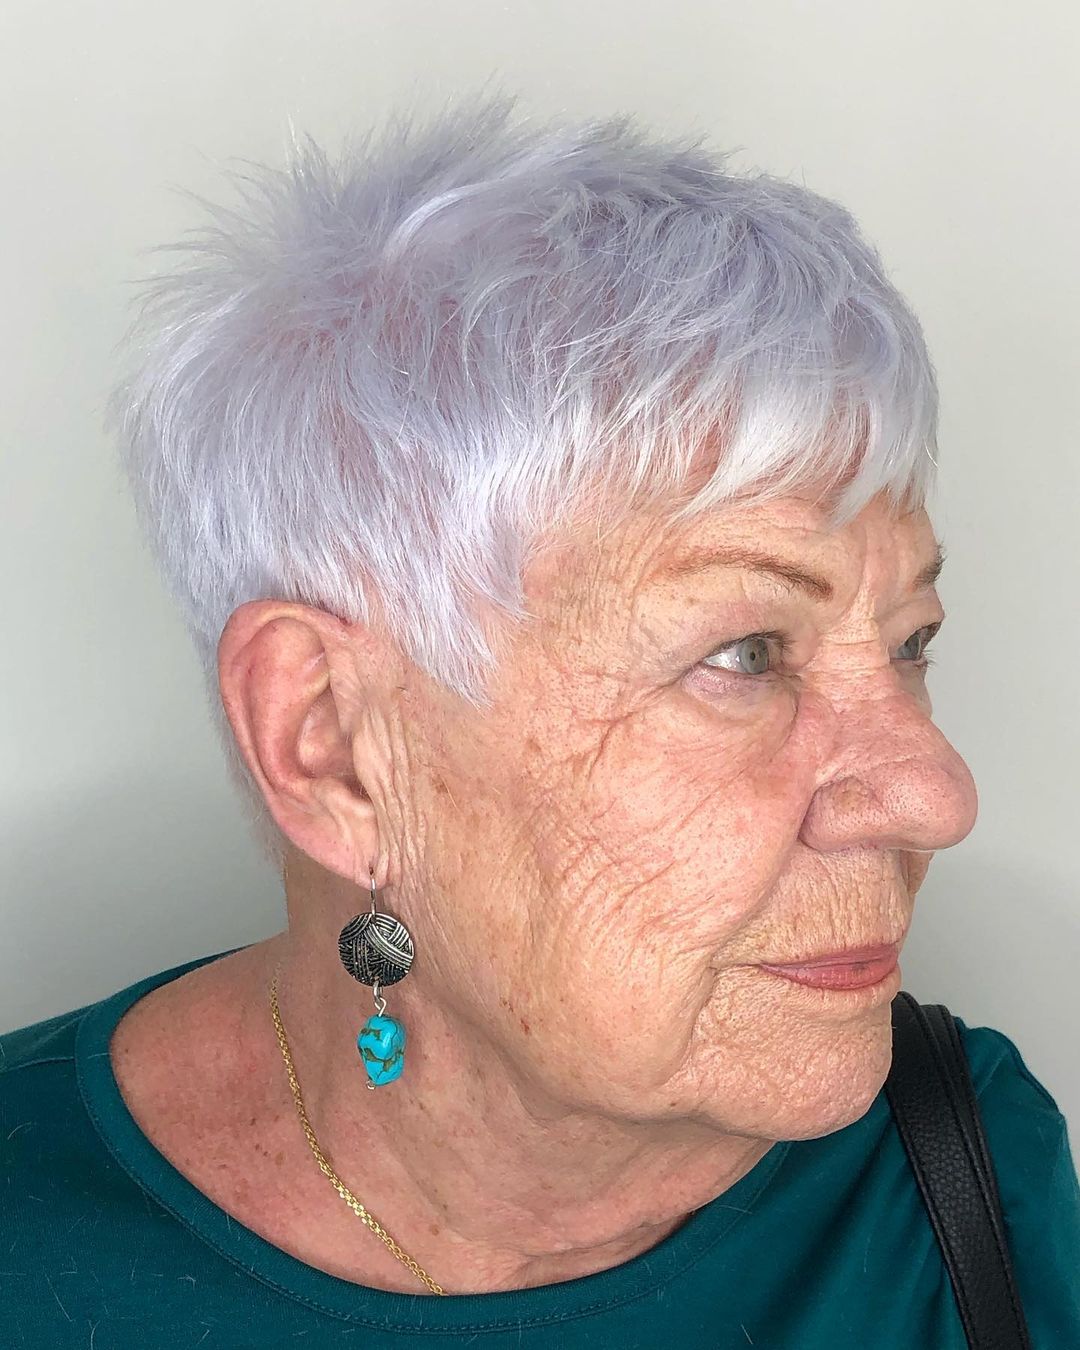 18 Modern Haircuts for Women Over 70 to Look Younger